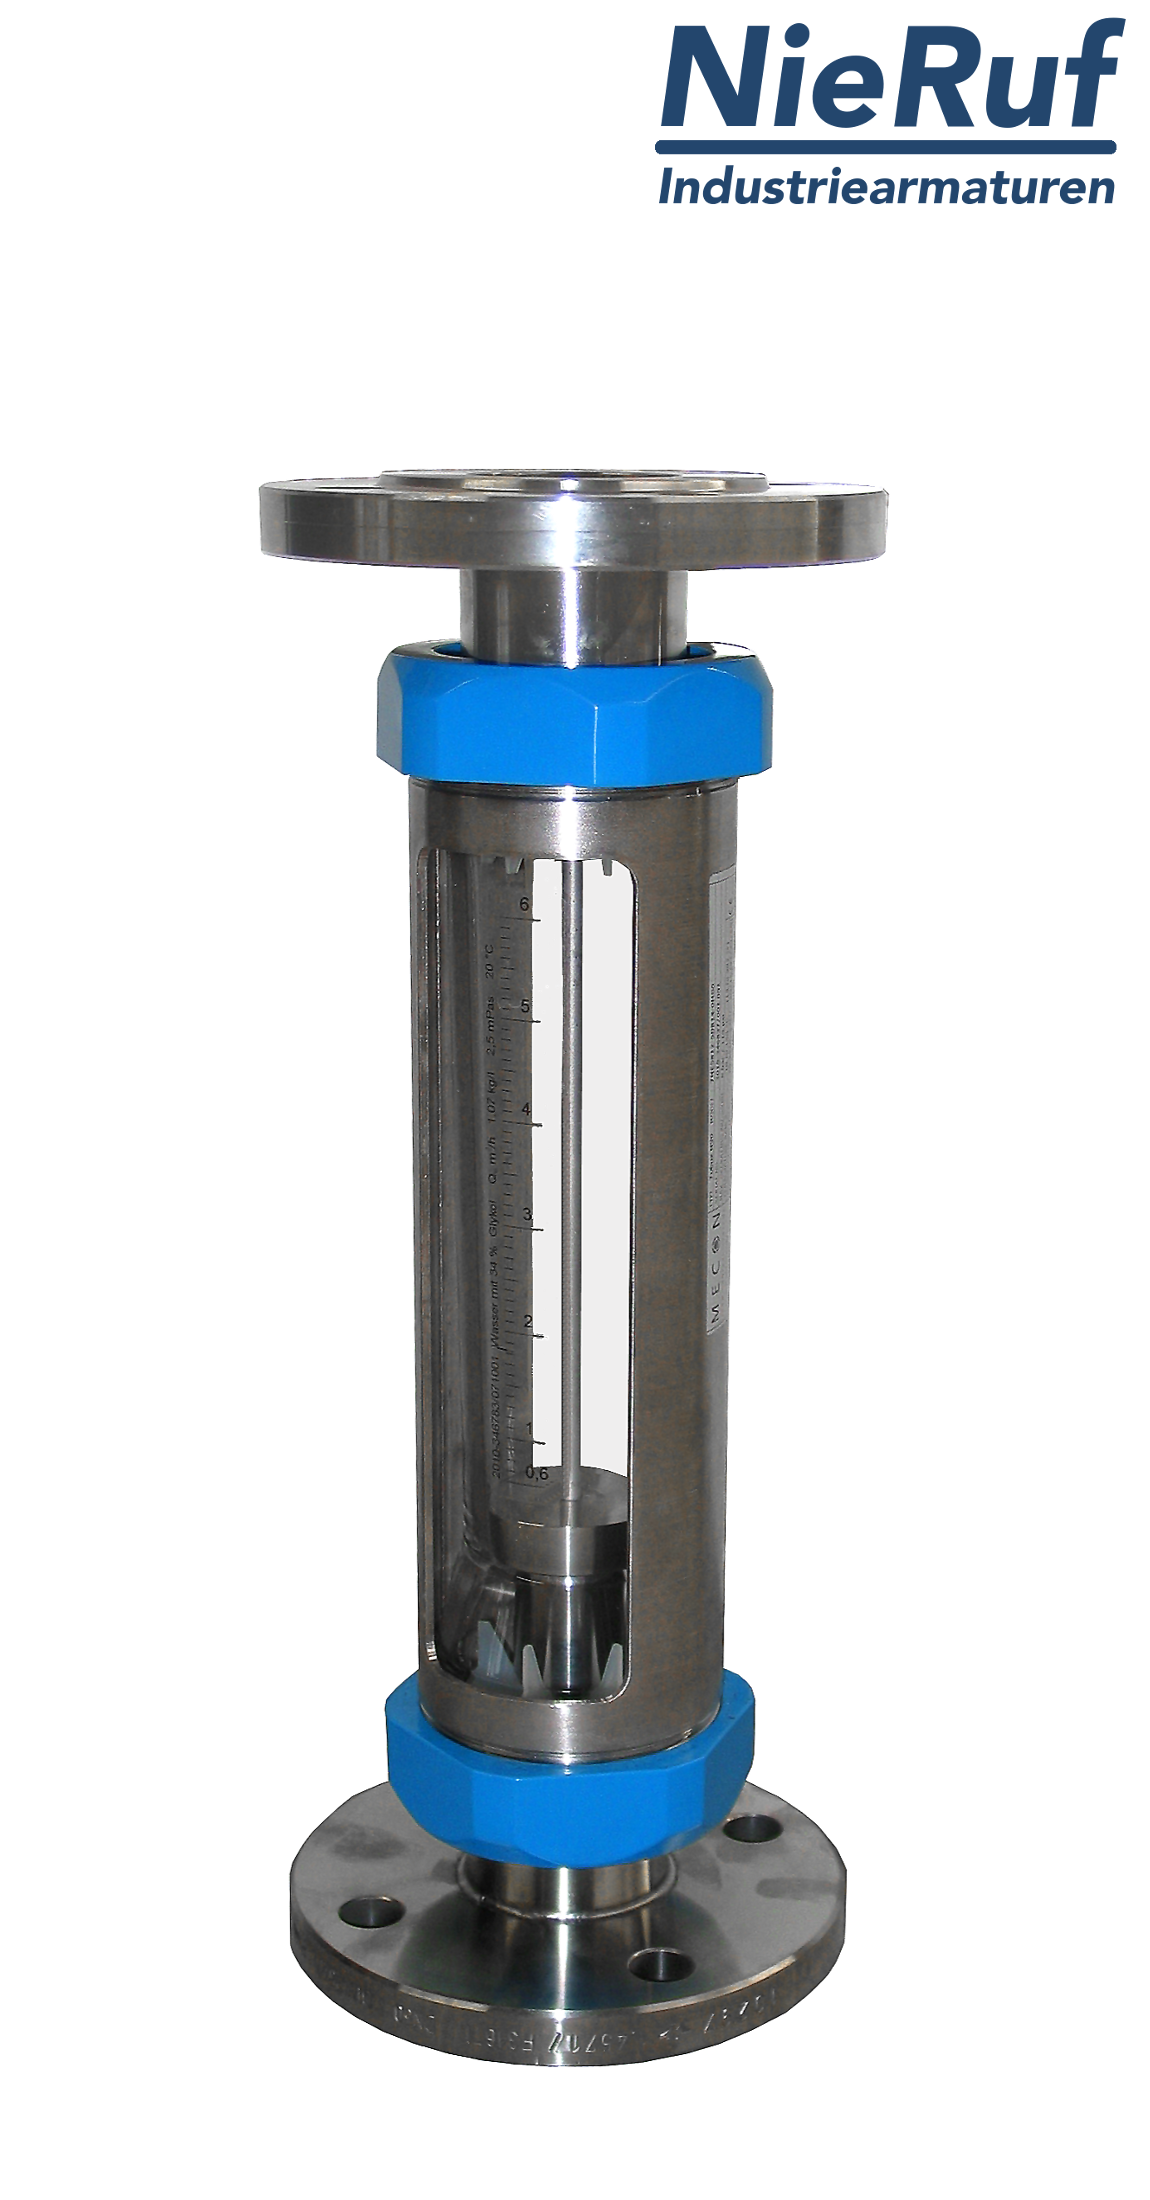 Variable area flowmeter stainless steel + borosilicate flange DN80 800.0 - 8000 l/h water FKM